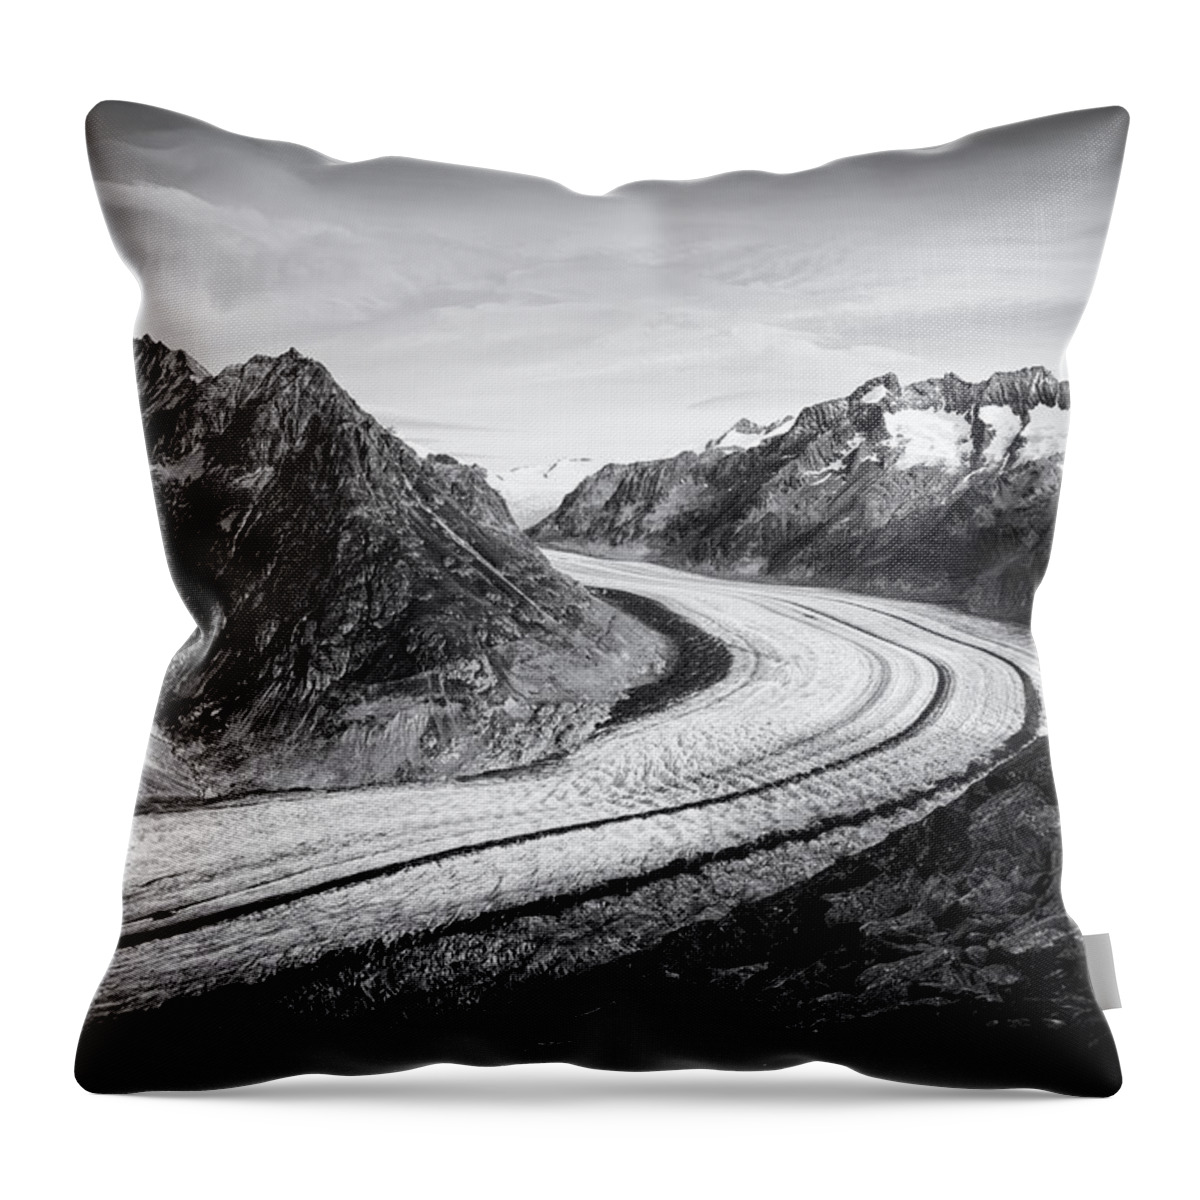 Aletsch Glacier Throw Pillow featuring the photograph Great Aletsch Glacier Switzerland Black and White by Matthias Hauser